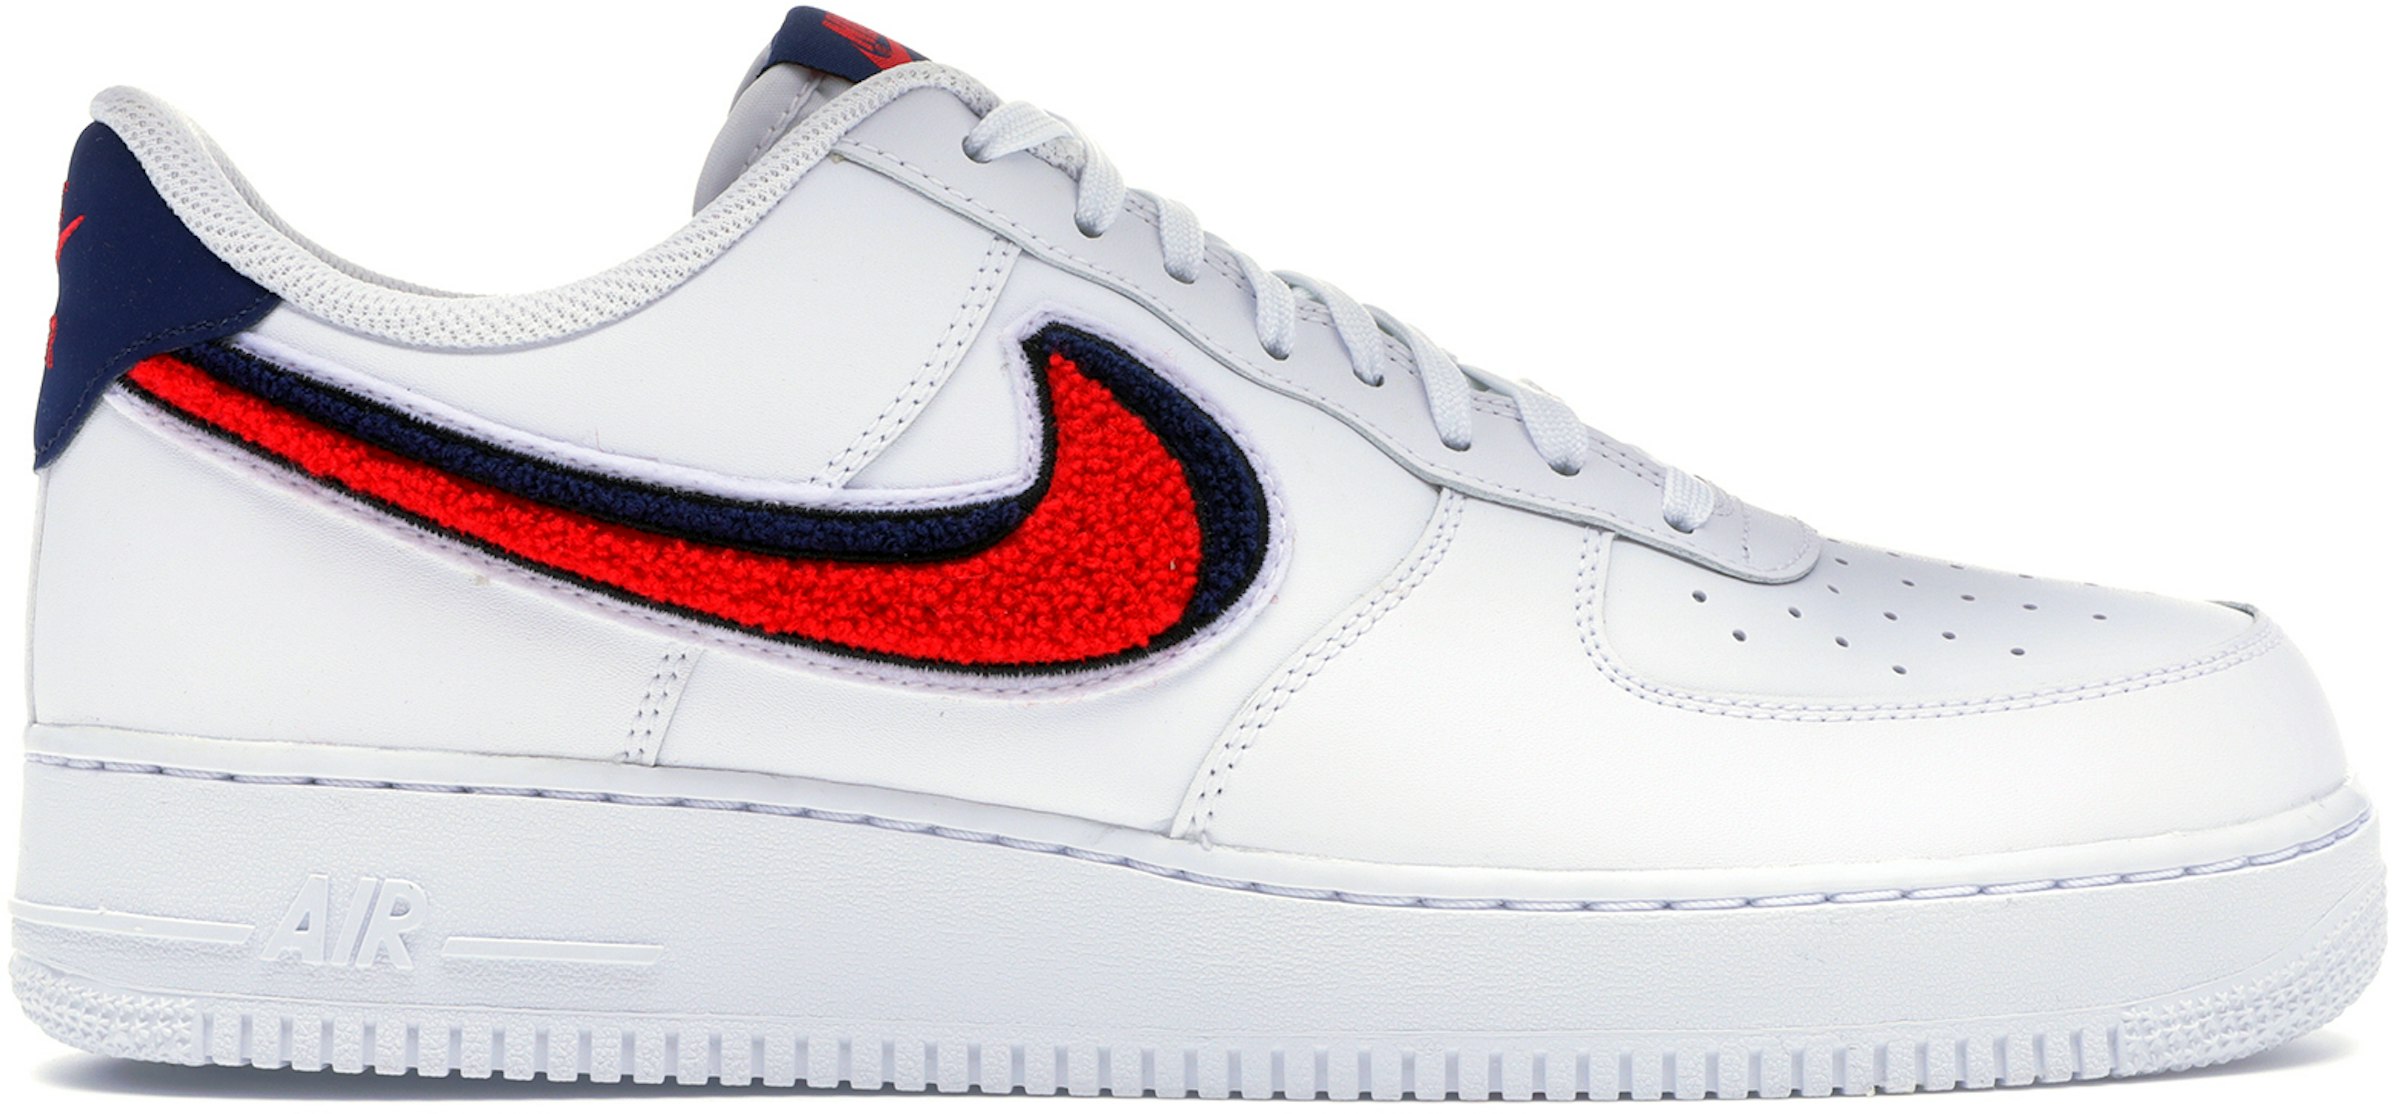 Nike Air 1 Low Chenille Swoosh White Red Blue Men's - 823511-106 - US